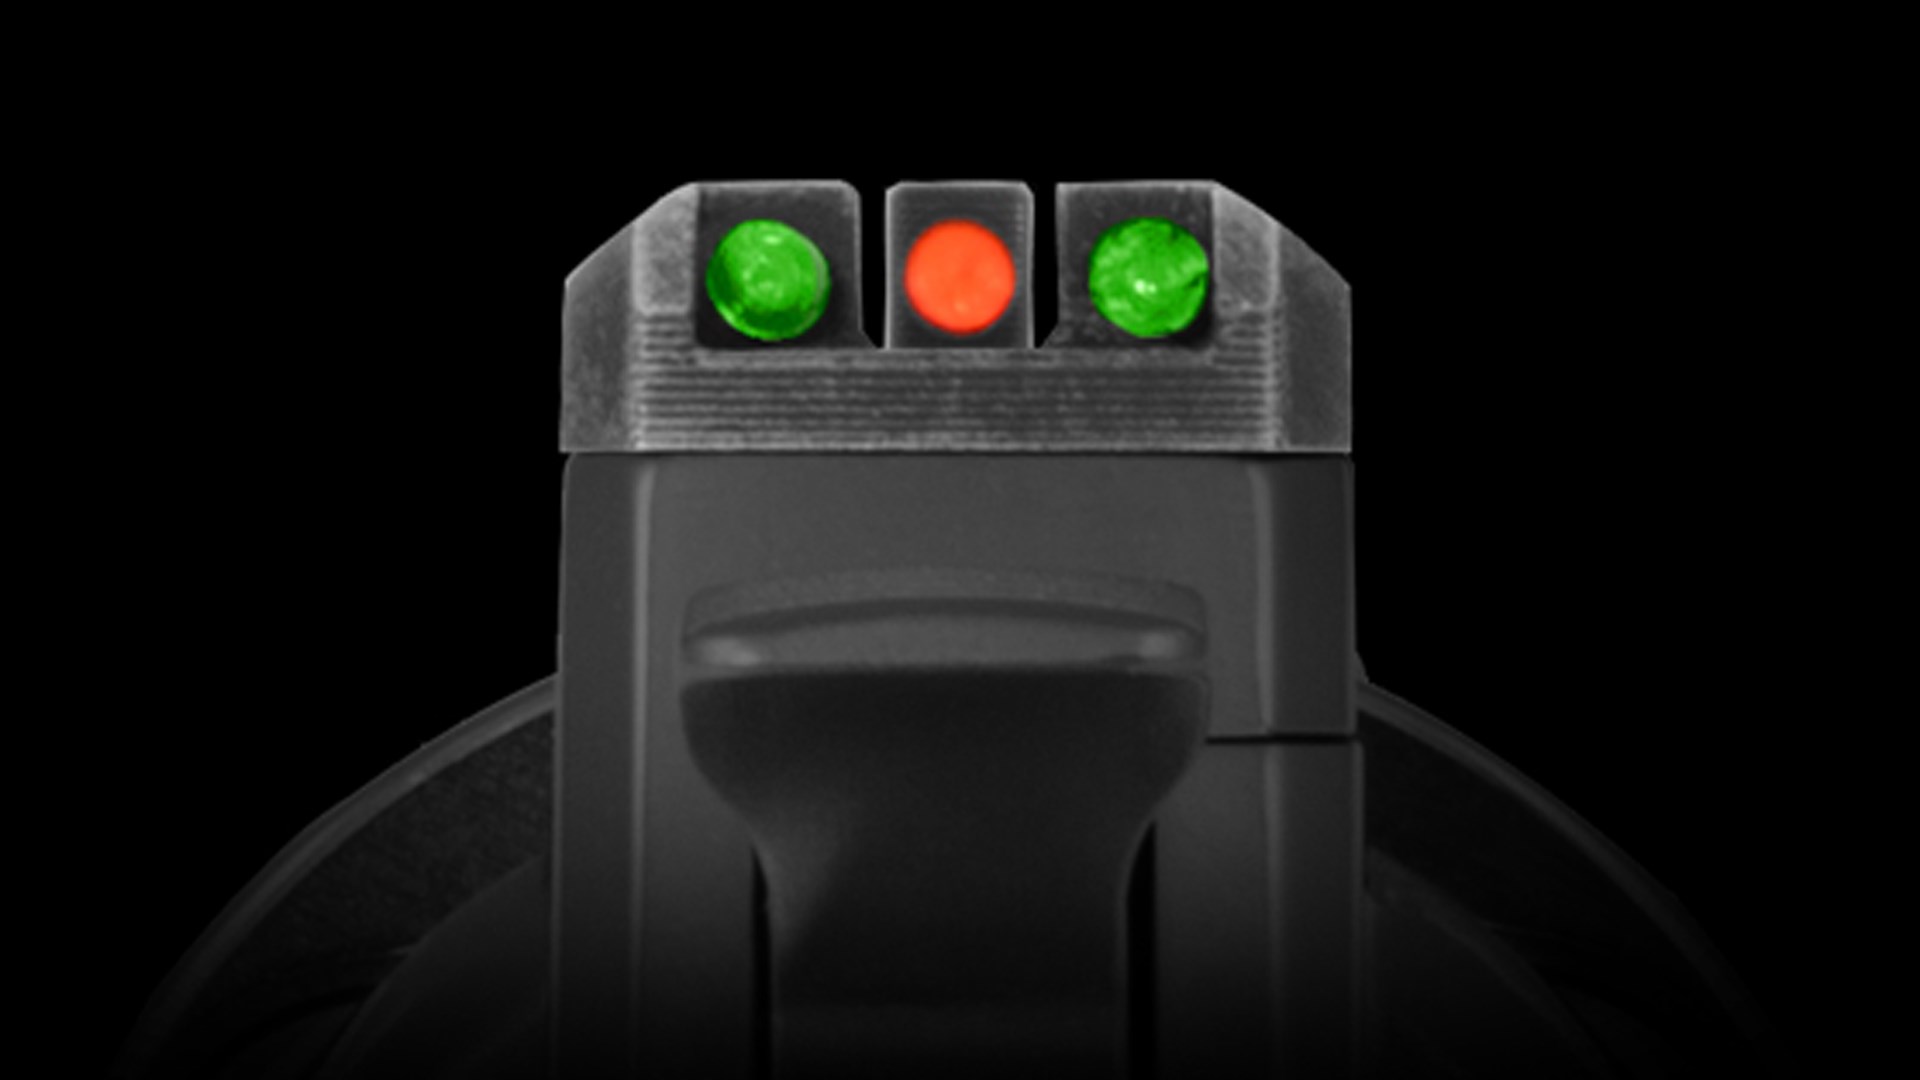 Details of the high-visibility sights on top of the Diamondback SDR revolver.